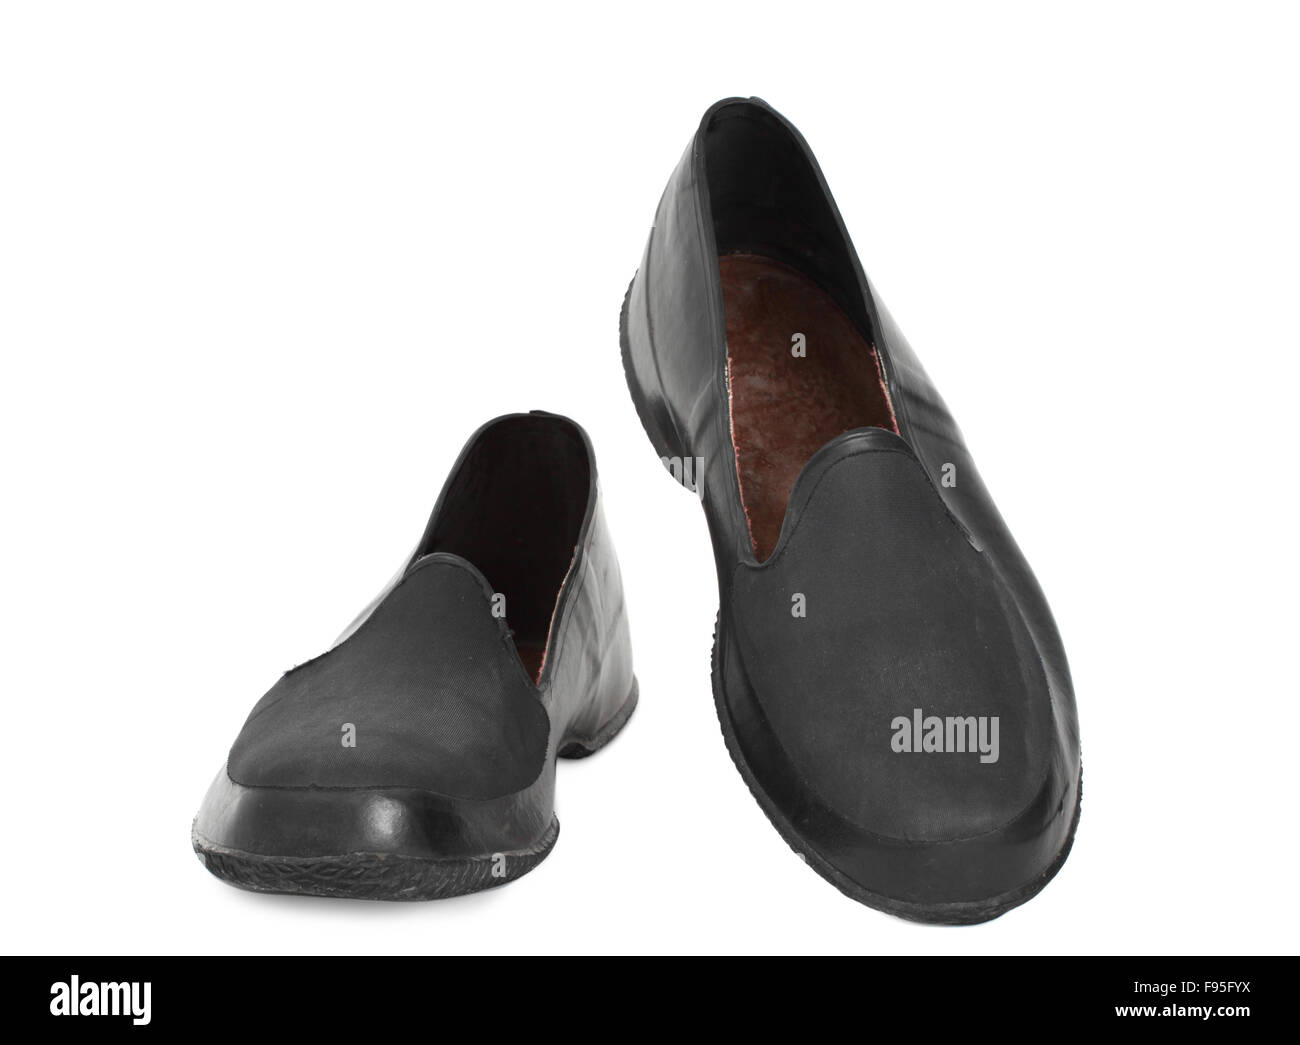 rubber shoe cover Stock Photo - Alamy